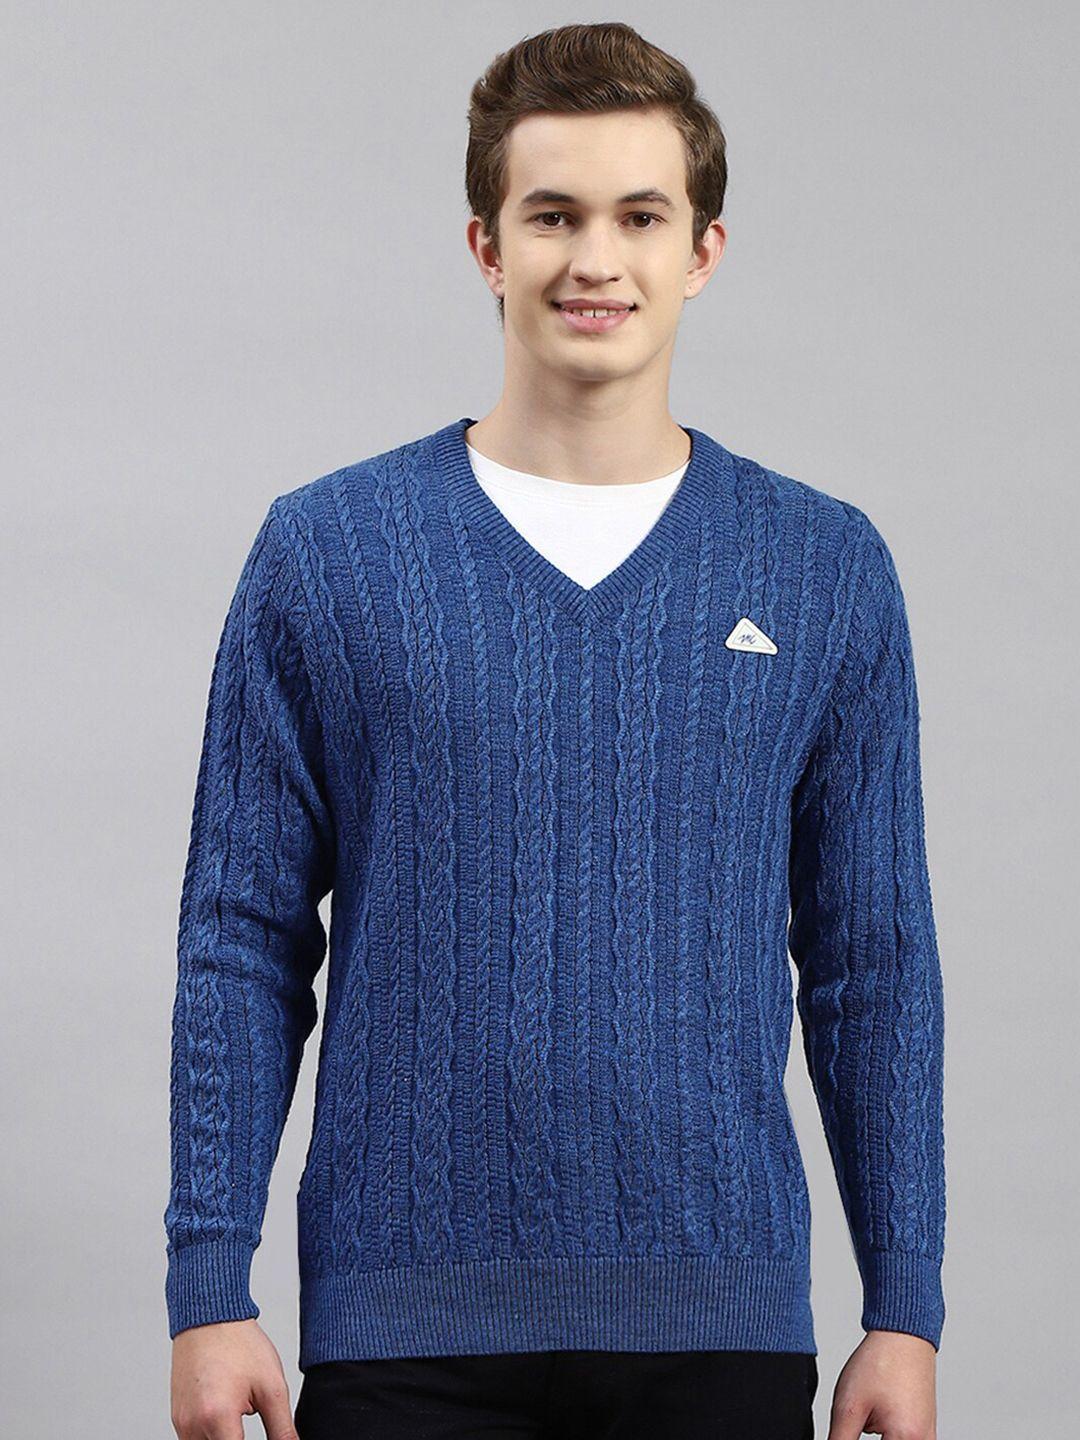 monte carlo cable knit woollen pullover sweater